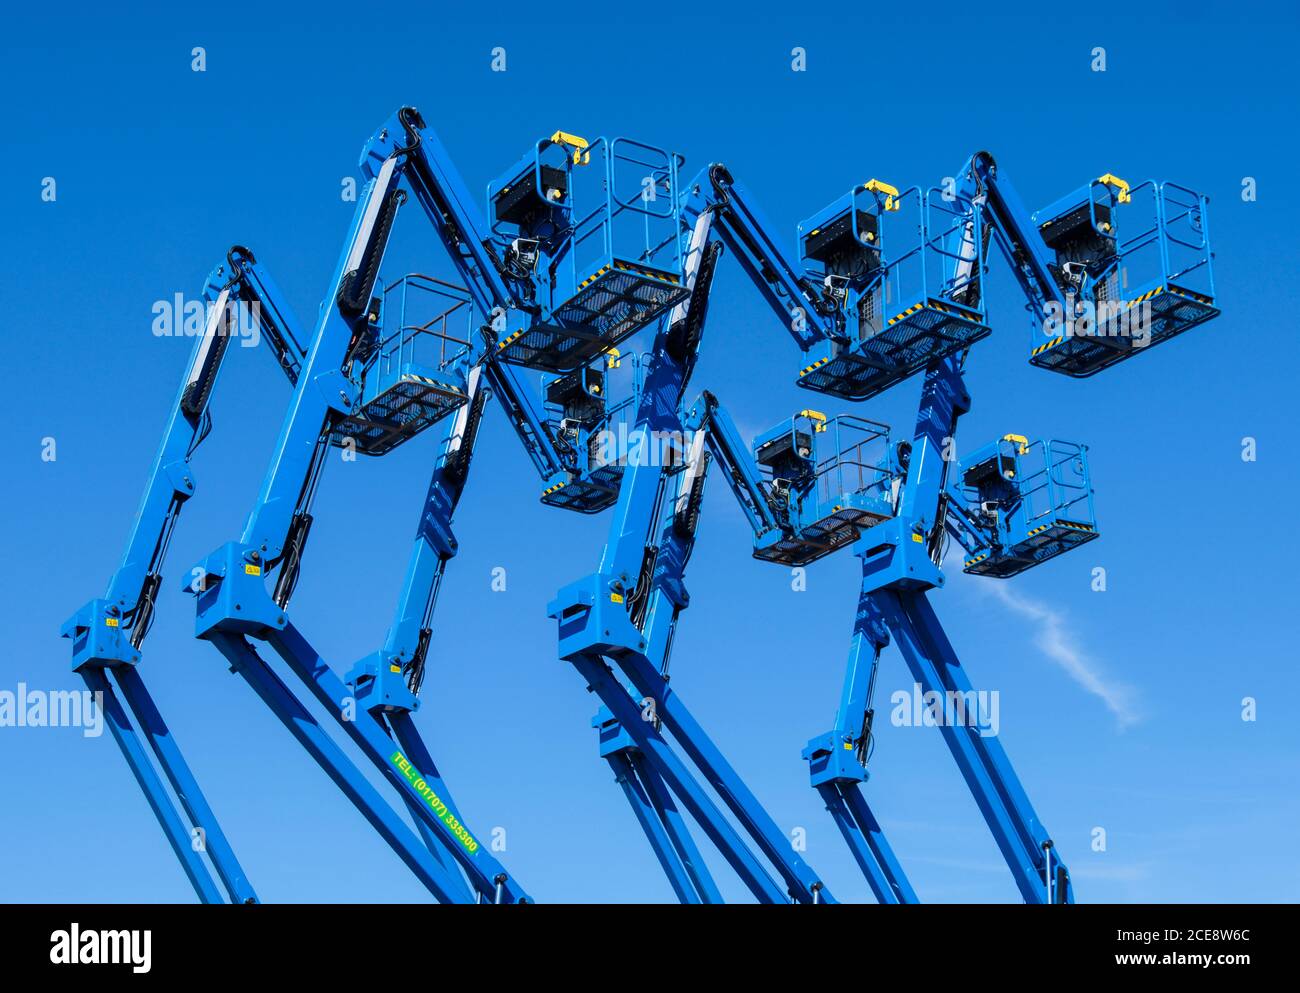 A yard full of articulating boom lifts  or cherry pickers. Stock Photo